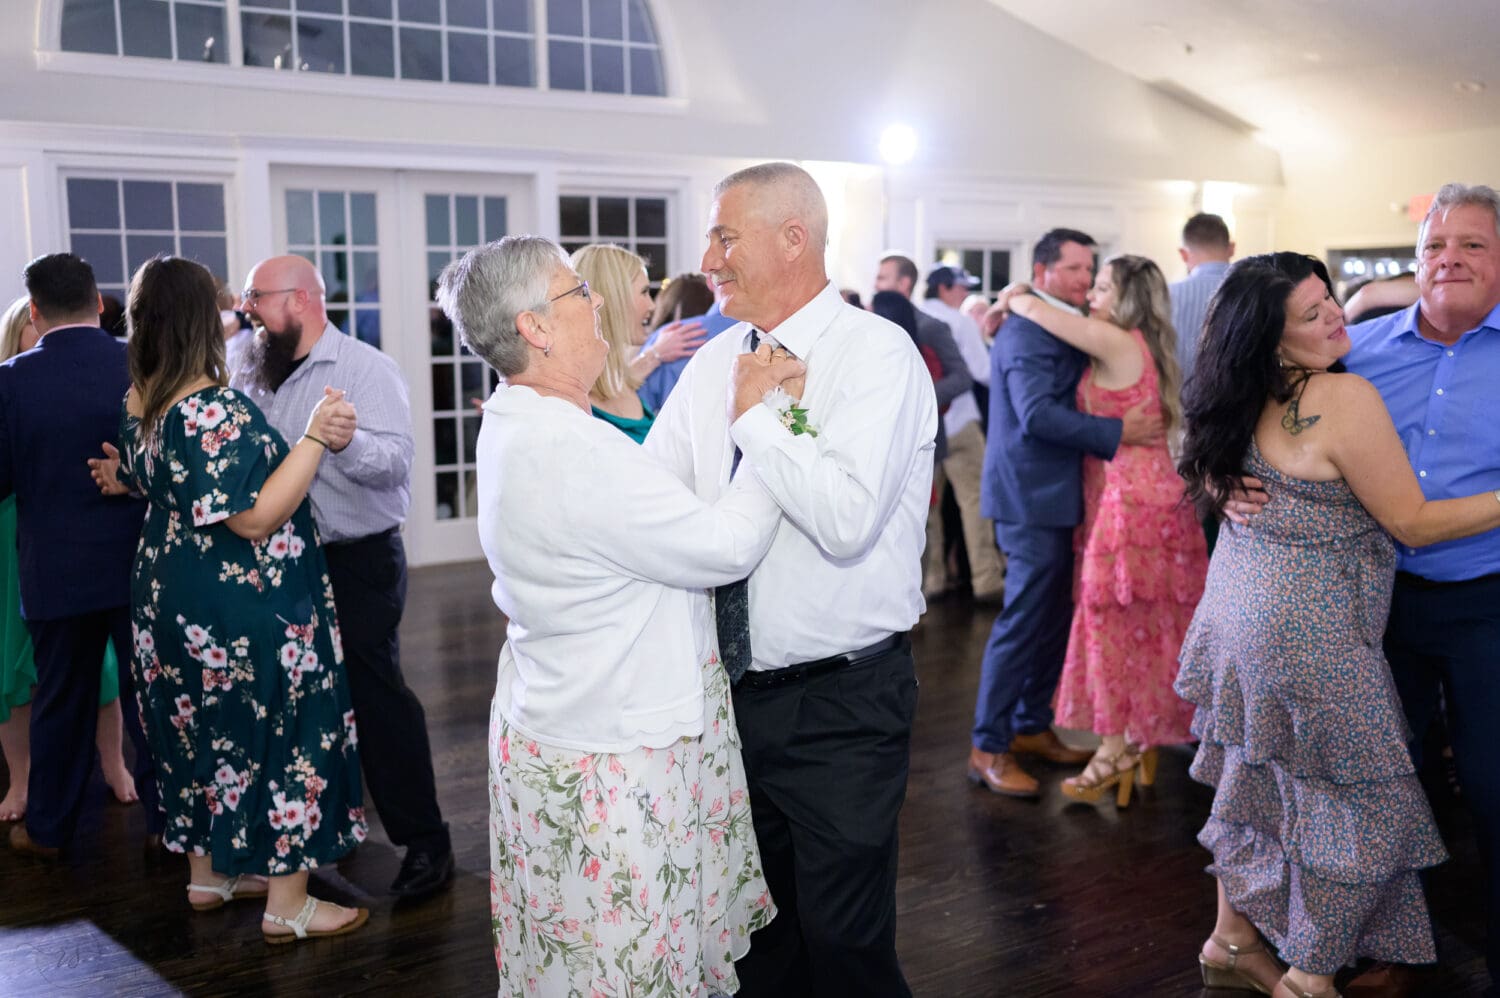 Lots of fun on the dance floor during the reception - The Village House at Litchfield